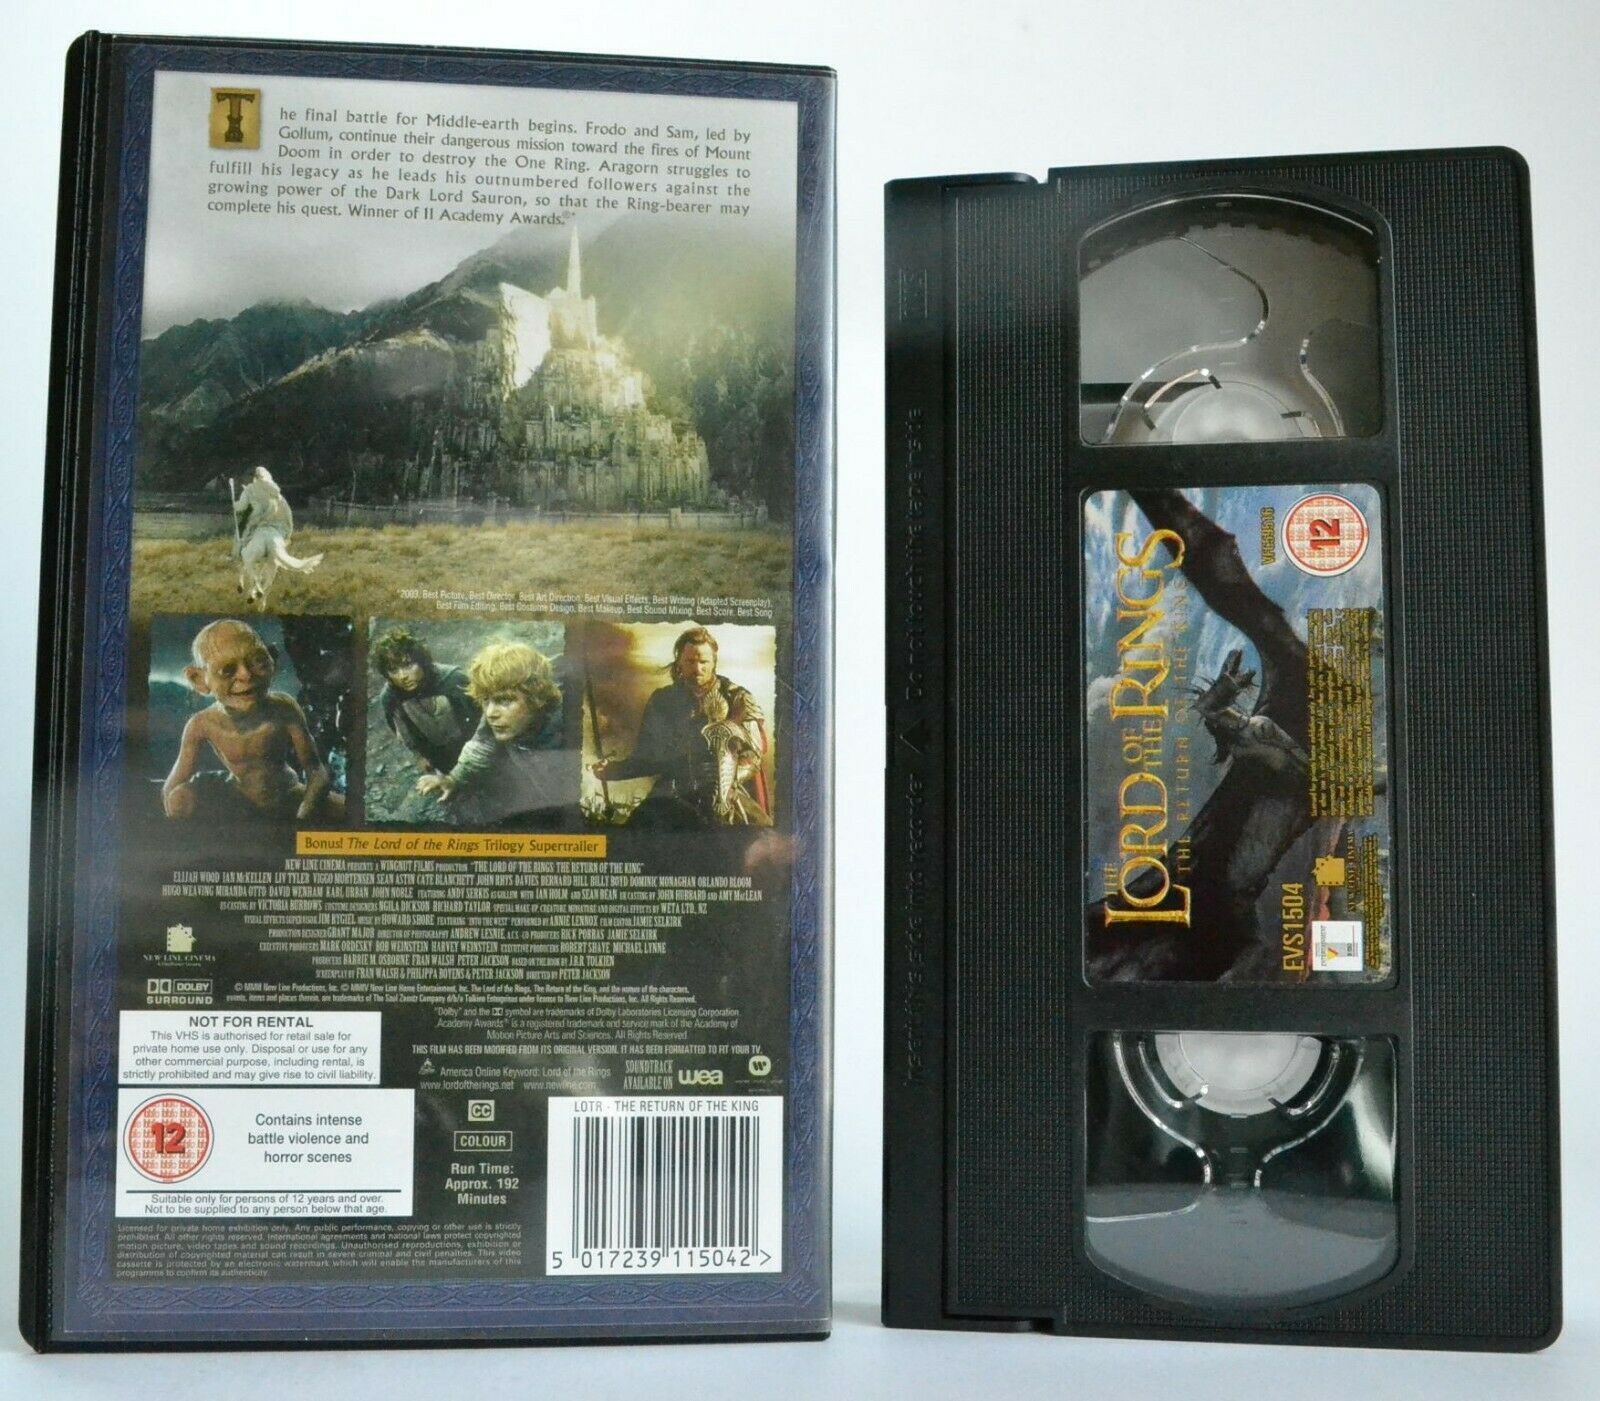 The Lord Of The Rings: The Return Of The King; Peter Jackson - Fantasy - Pal VHS-